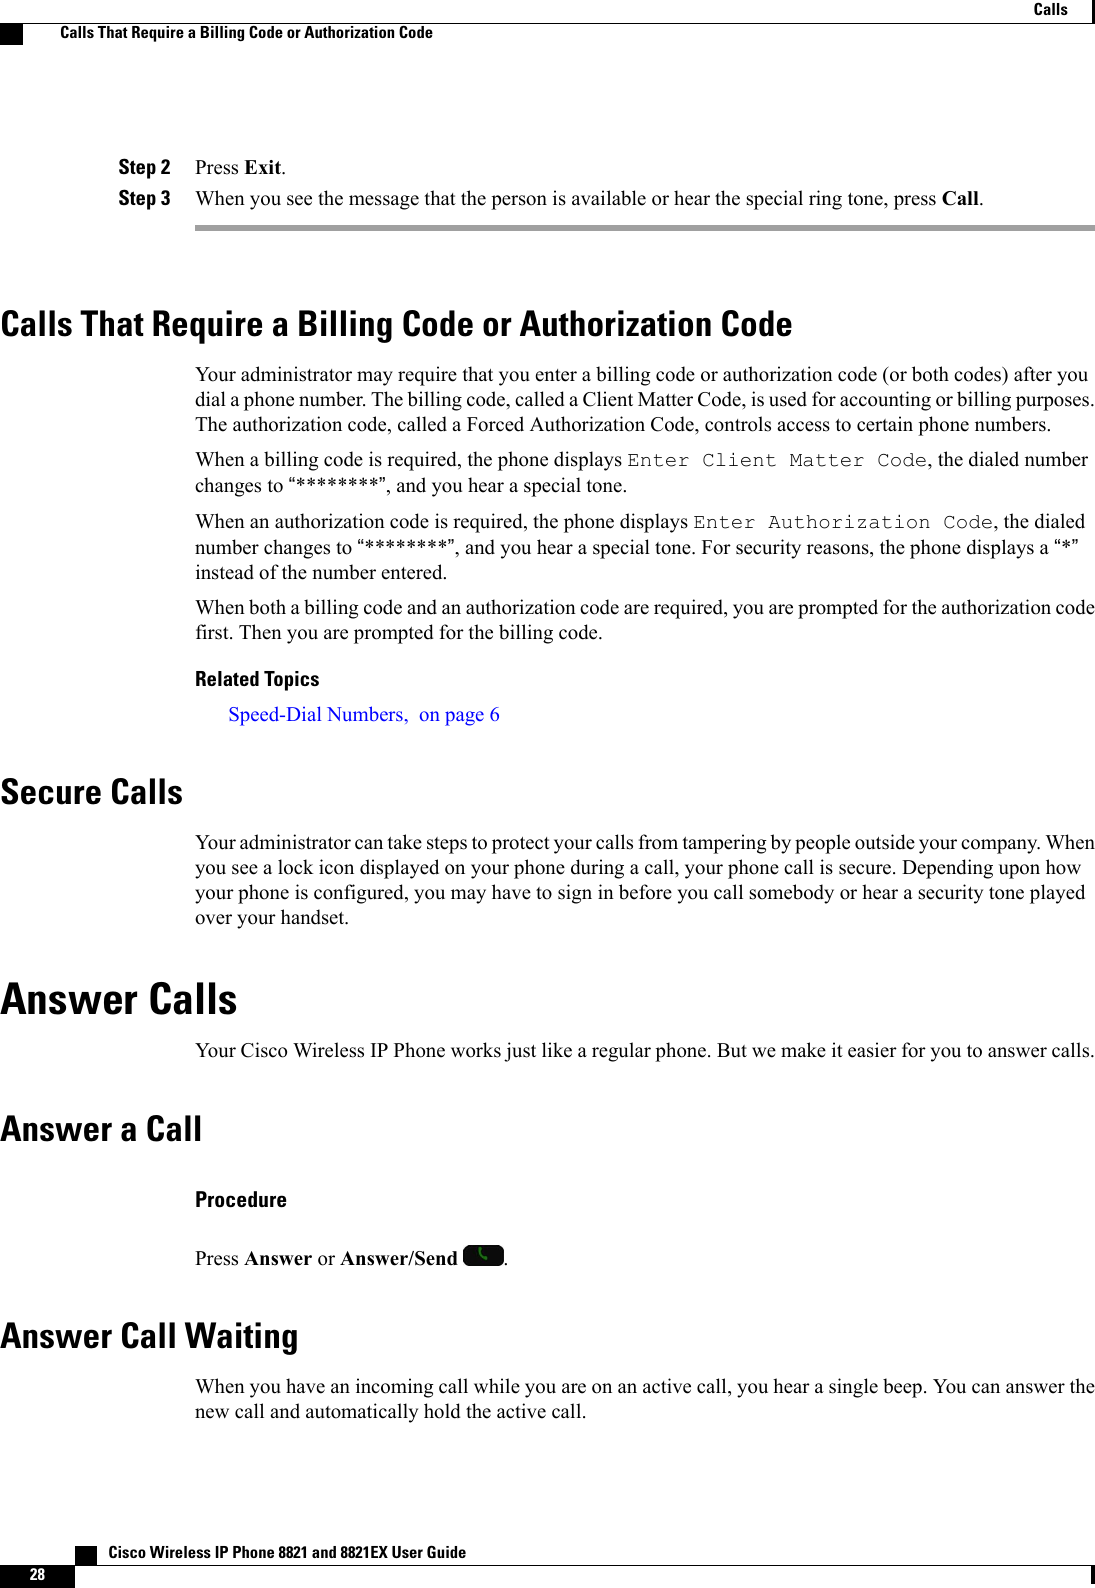 Step 2 Press Exit.Step 3 When you see the message that the person is available or hear the special ring tone, press Call.Calls That Require a Billing Code or Authorization CodeYour administrator may require that you enter a billing code or authorization code (or both codes) after youdial a phone number. The billing code, called a Client Matter Code, is used for accounting or billing purposes.The authorization code, called a Forced Authorization Code, controls access to certain phone numbers.When a billing code is required, the phone displays Enter Client Matter Code, the dialed numberchanges to “********”, and you hear a special tone.When an authorization code is required, the phone displays Enter Authorization Code, the dialednumber changes to “********”, and you hear a special tone. For security reasons, the phone displays a “*”instead of the number entered.When both a billing code and an authorization code are required, you are prompted for the authorization codefirst. Then you are prompted for the billing code.Related TopicsSpeed-Dial Numbers, on page 6Secure CallsYour administrator can take steps to protect your calls from tampering by people outside your company. Whenyou see a lock icon displayed on your phone during a call, your phone call is secure. Depending upon howyour phone is configured, you may have to sign in before you call somebody or hear a security tone playedover your handset.Answer CallsYour Cisco Wireless IP Phone works just like a regular phone. But we make it easier for you to answer calls.Answer a CallProcedurePress Answer or Answer/Send .Answer Call WaitingWhen you have an incoming call while you are on an active call, you hear a single beep. You can answer thenew call and automatically hold the active call.   Cisco Wireless IP Phone 8821 and 8821EX User Guide28CallsCalls That Require a Billing Code or Authorization Code